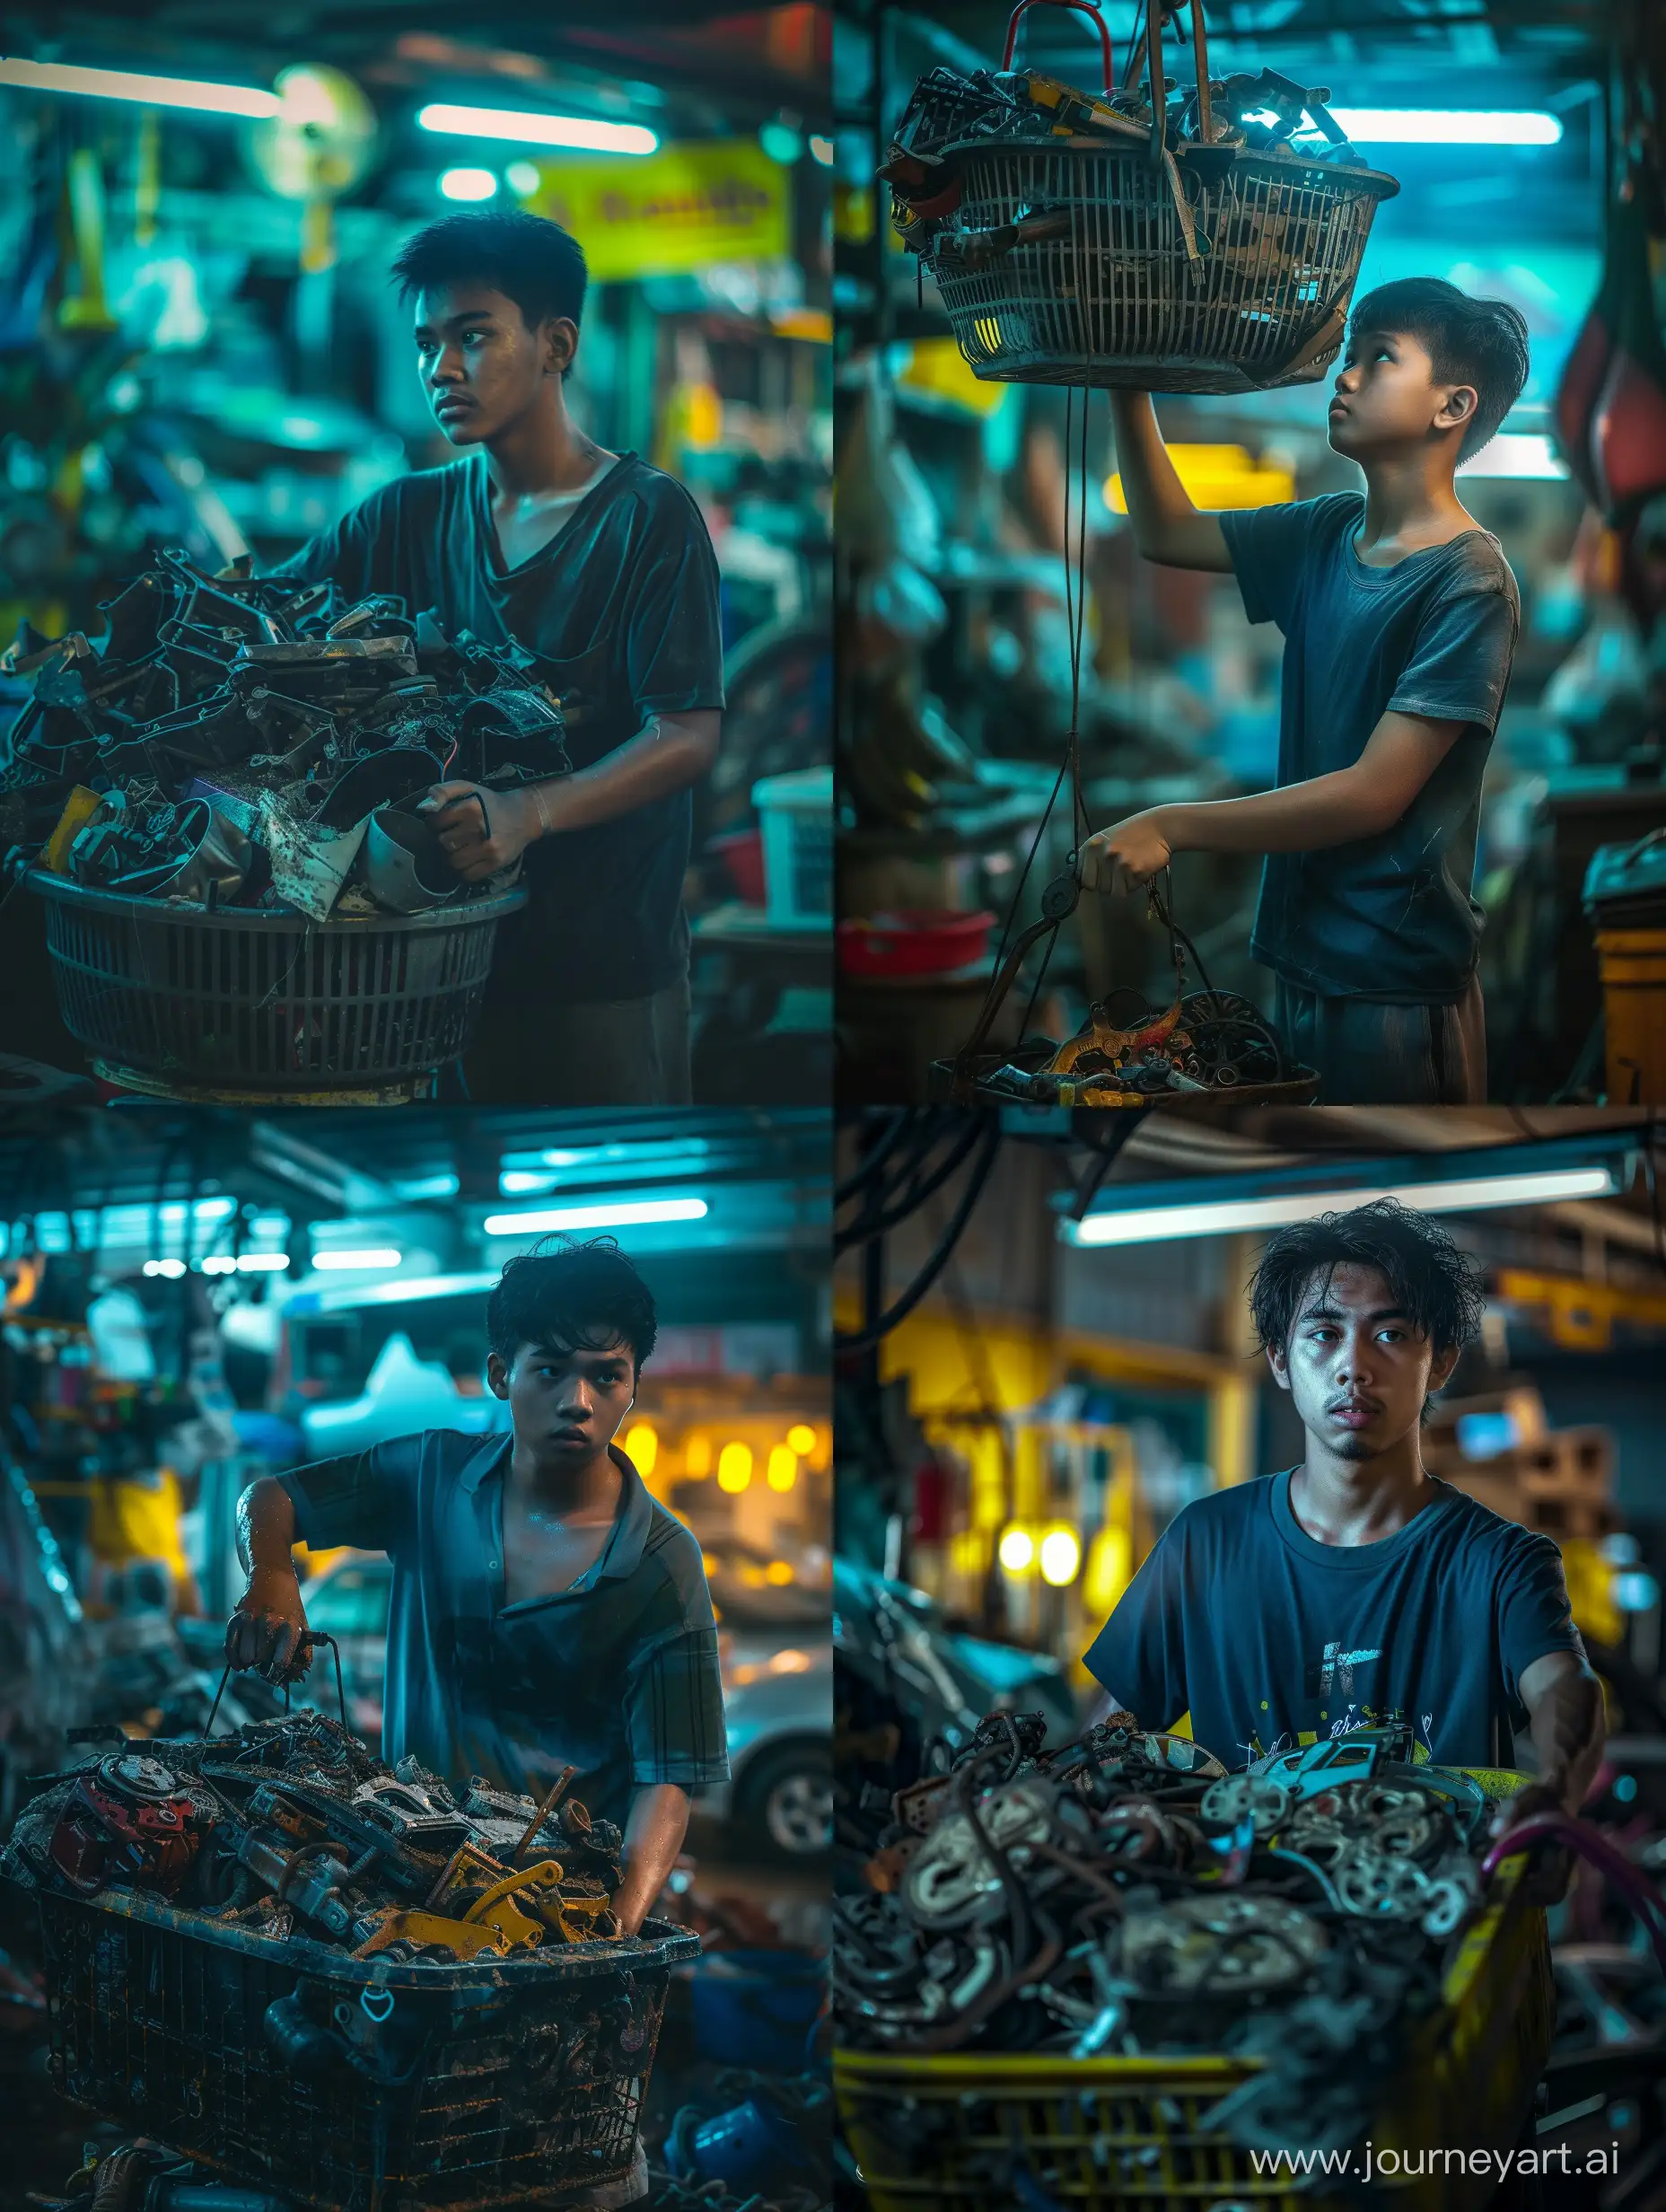 ultra realistic, close up A MALAY TEENAGE MALE IS LIFTING A WASTE BASKET. IN THE BASKET FULL OF CAR SPARE PARTS THAT HAVE BEEN DAMAGED. THE ATMOSPHERE IN A CAR WORKSHOP. BEHIND THERE ARE YELLOW AND BLUE COLORED LIGHTS. canon eos-id x mark iii dslr --v 6.0